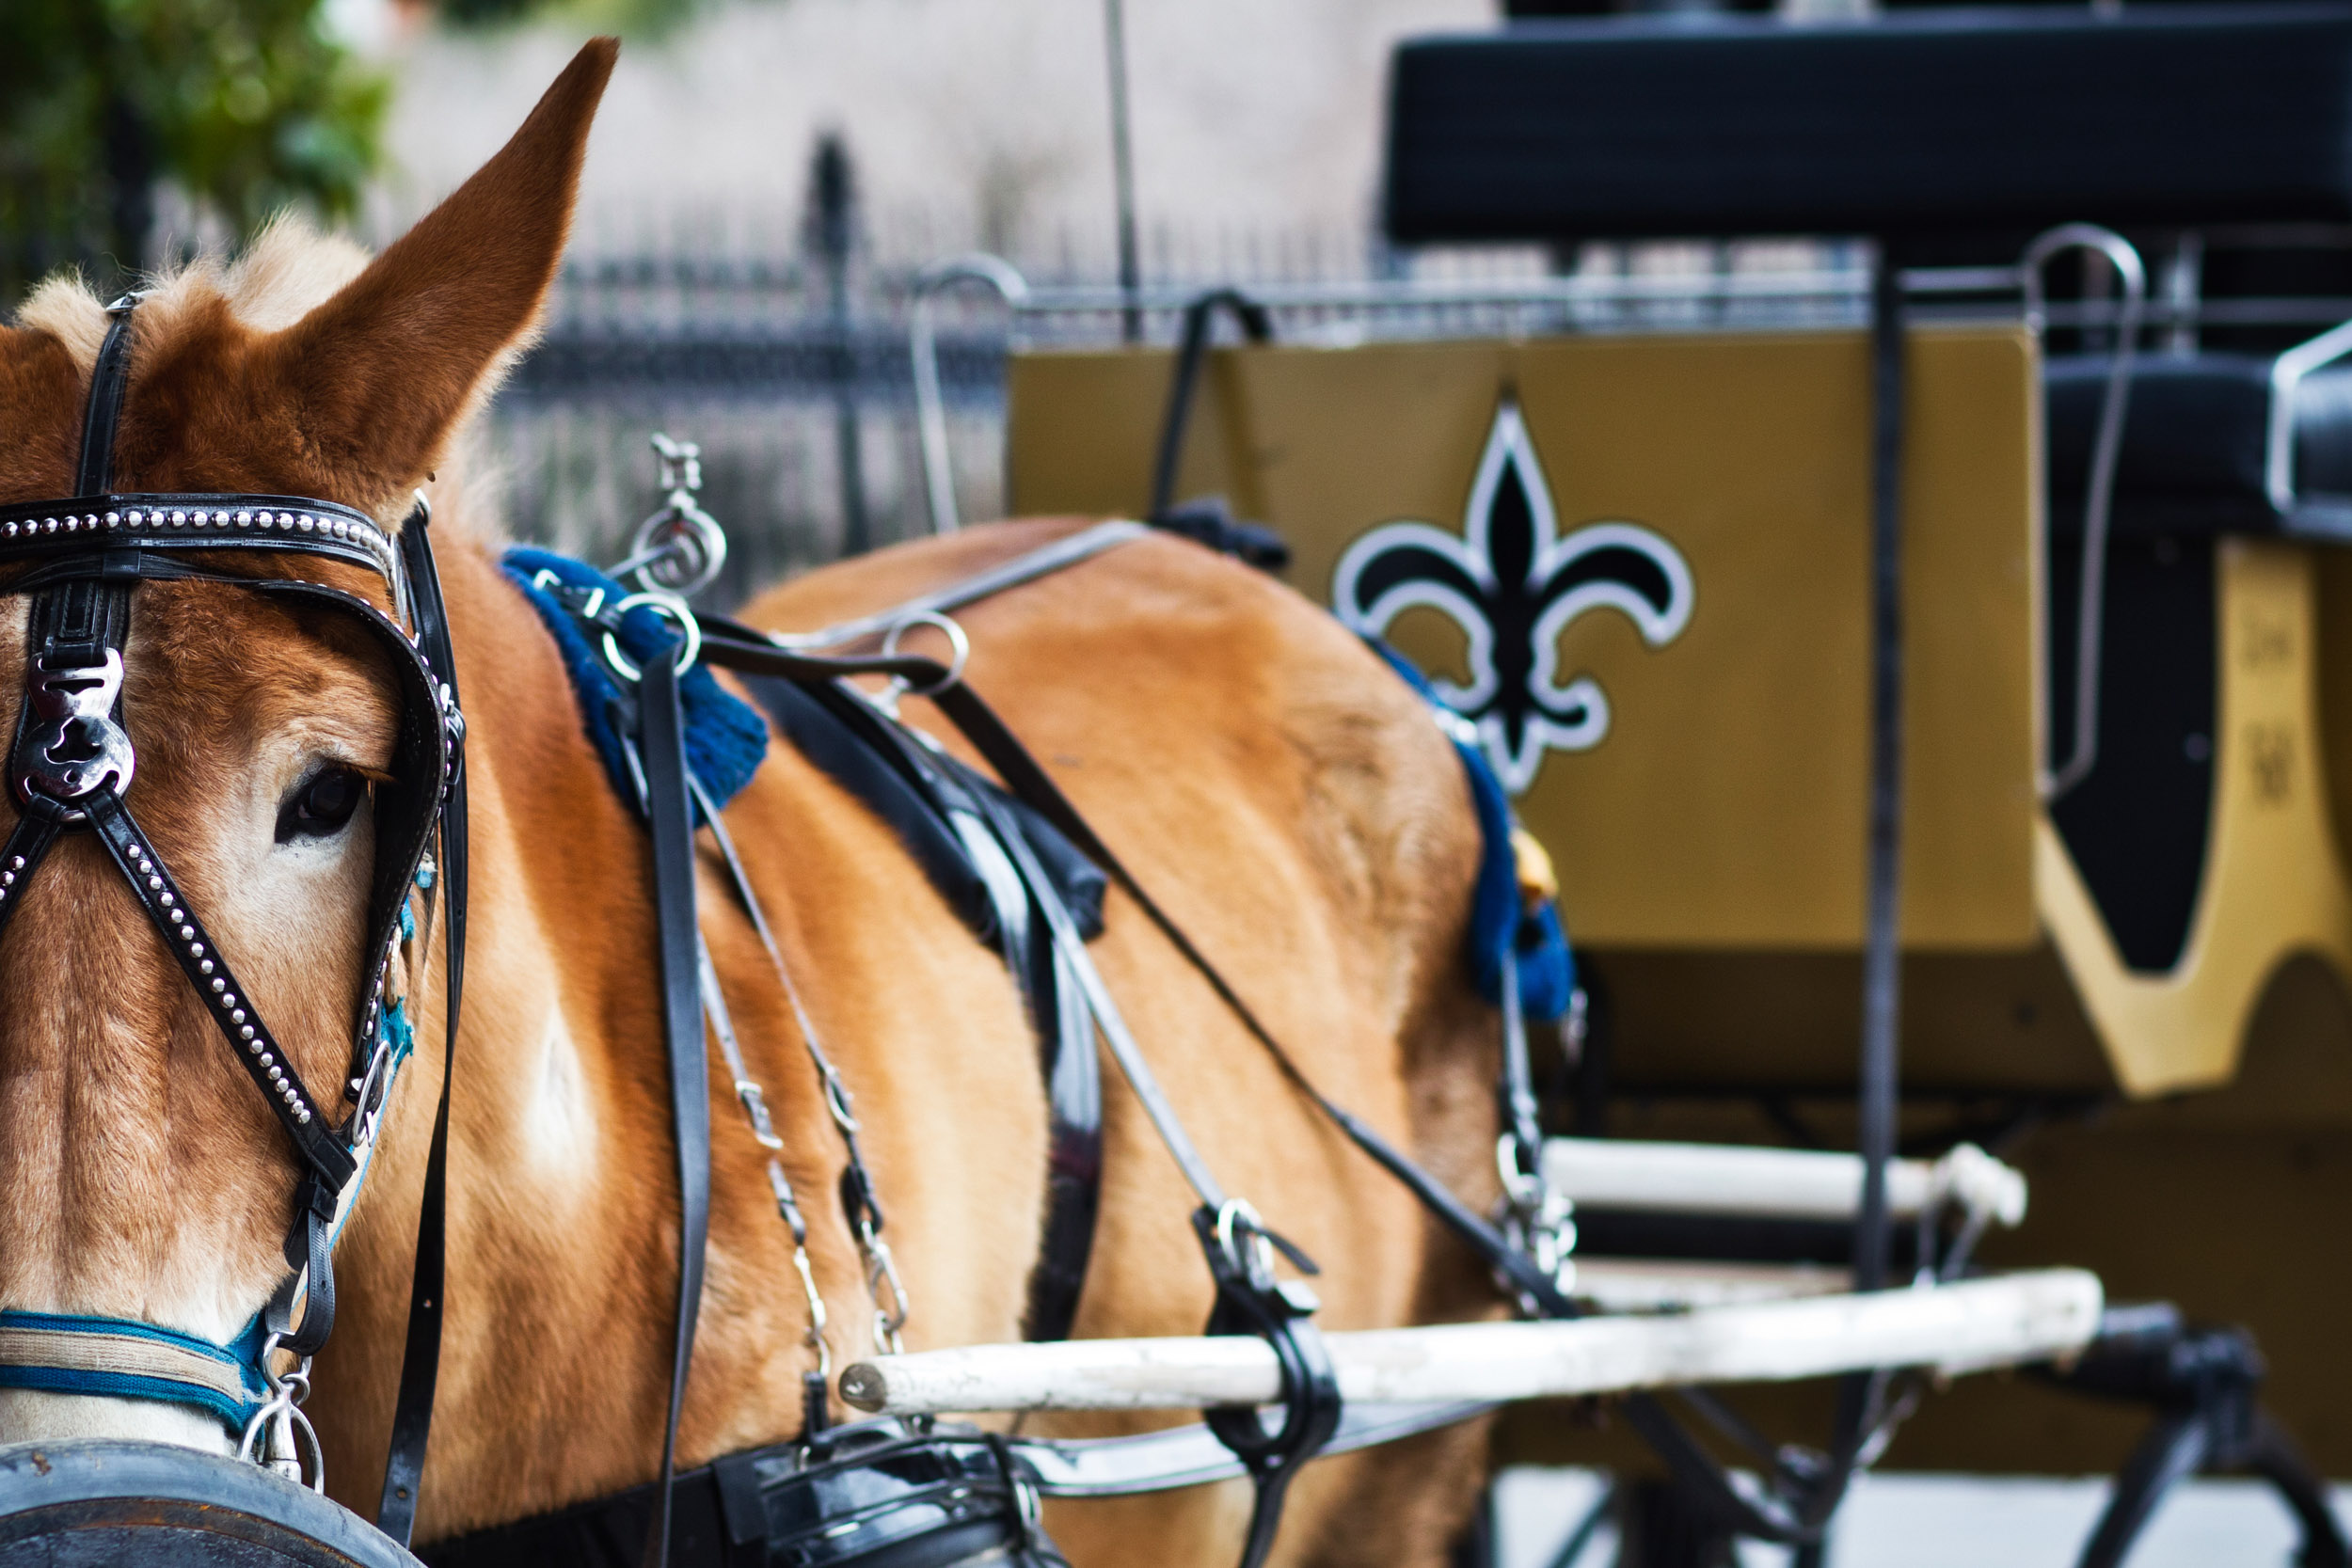 A mule waits patiently for its next Jackson Square stroll